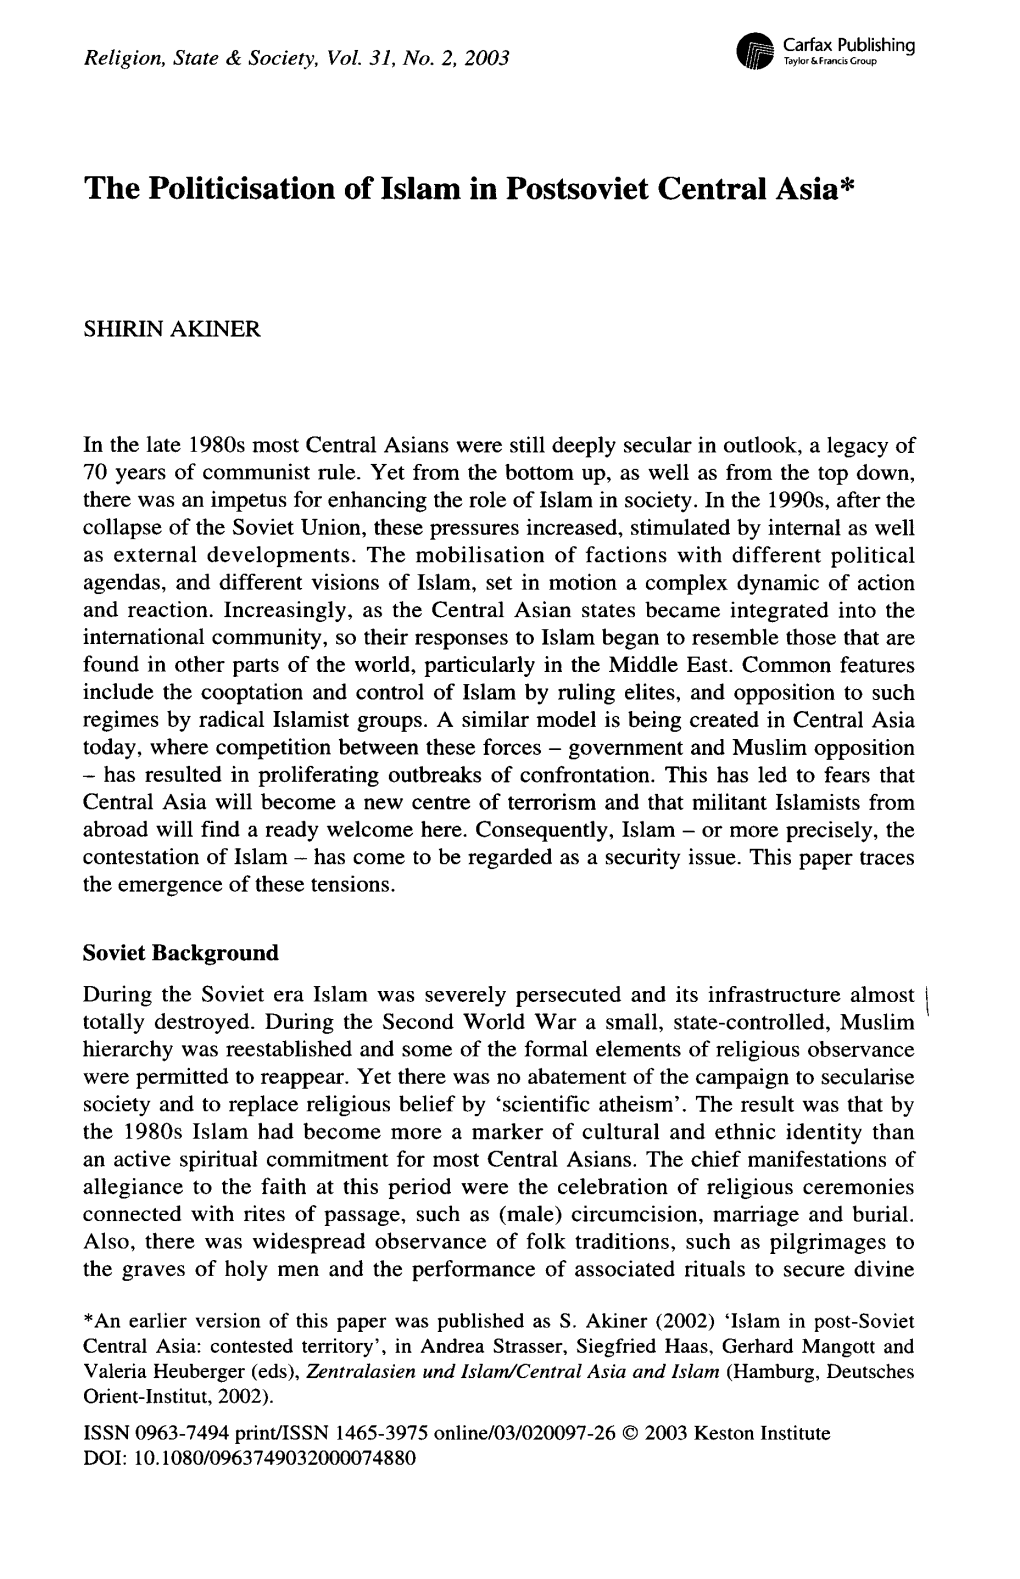 The Politicisation of Islam in Postsoviet Central Asia*